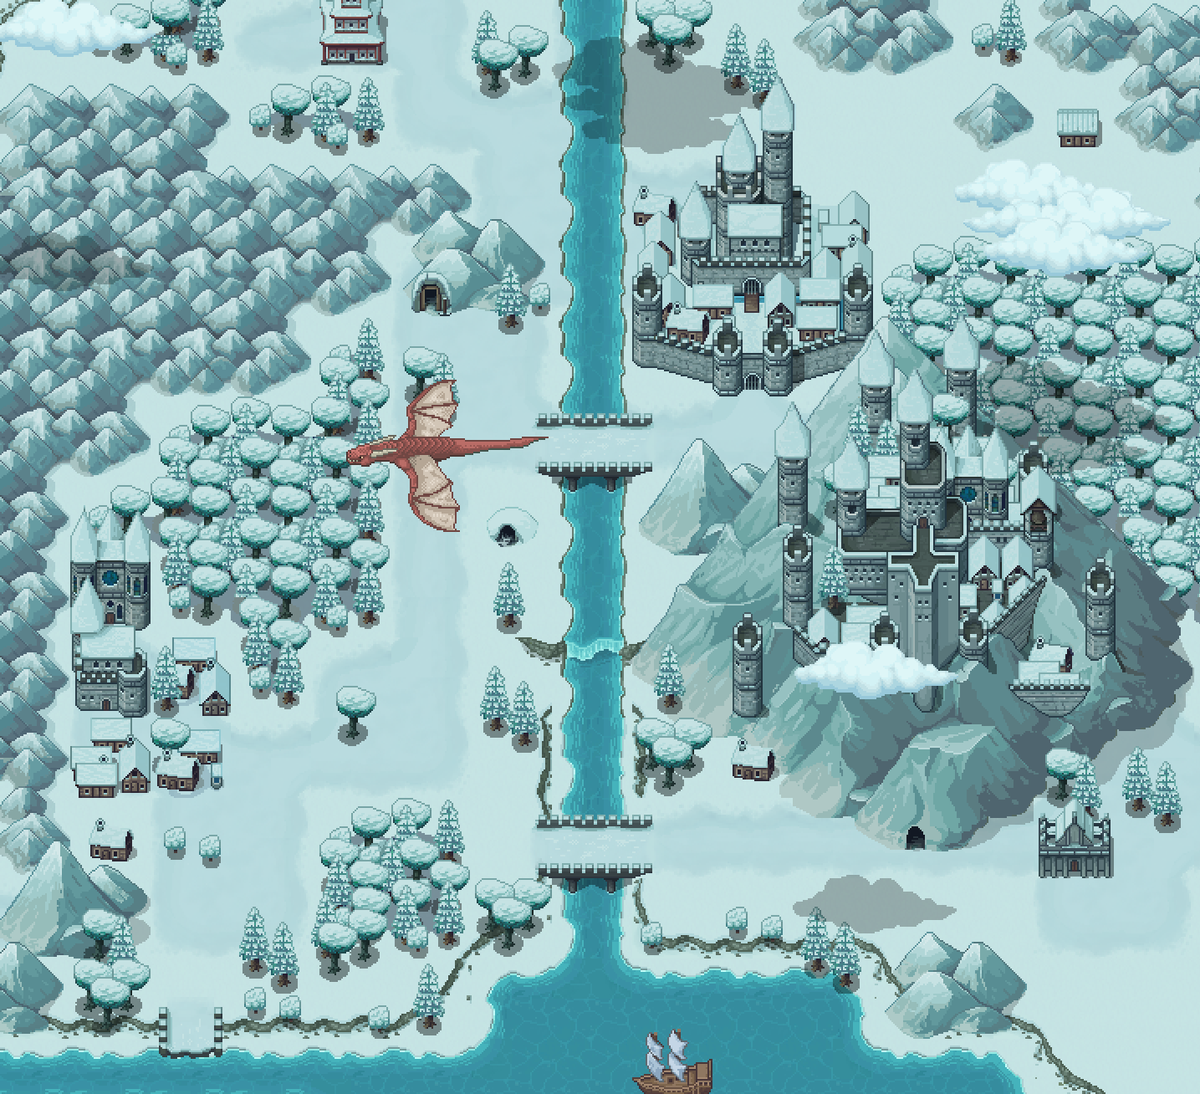 New update available. Added more winter/snowy stuf into the fantasy overworld tileset.
#gamedev #indiedev #pixelart #IndieGameDev #rpgmaker #RPGツクール #gamedevelopment